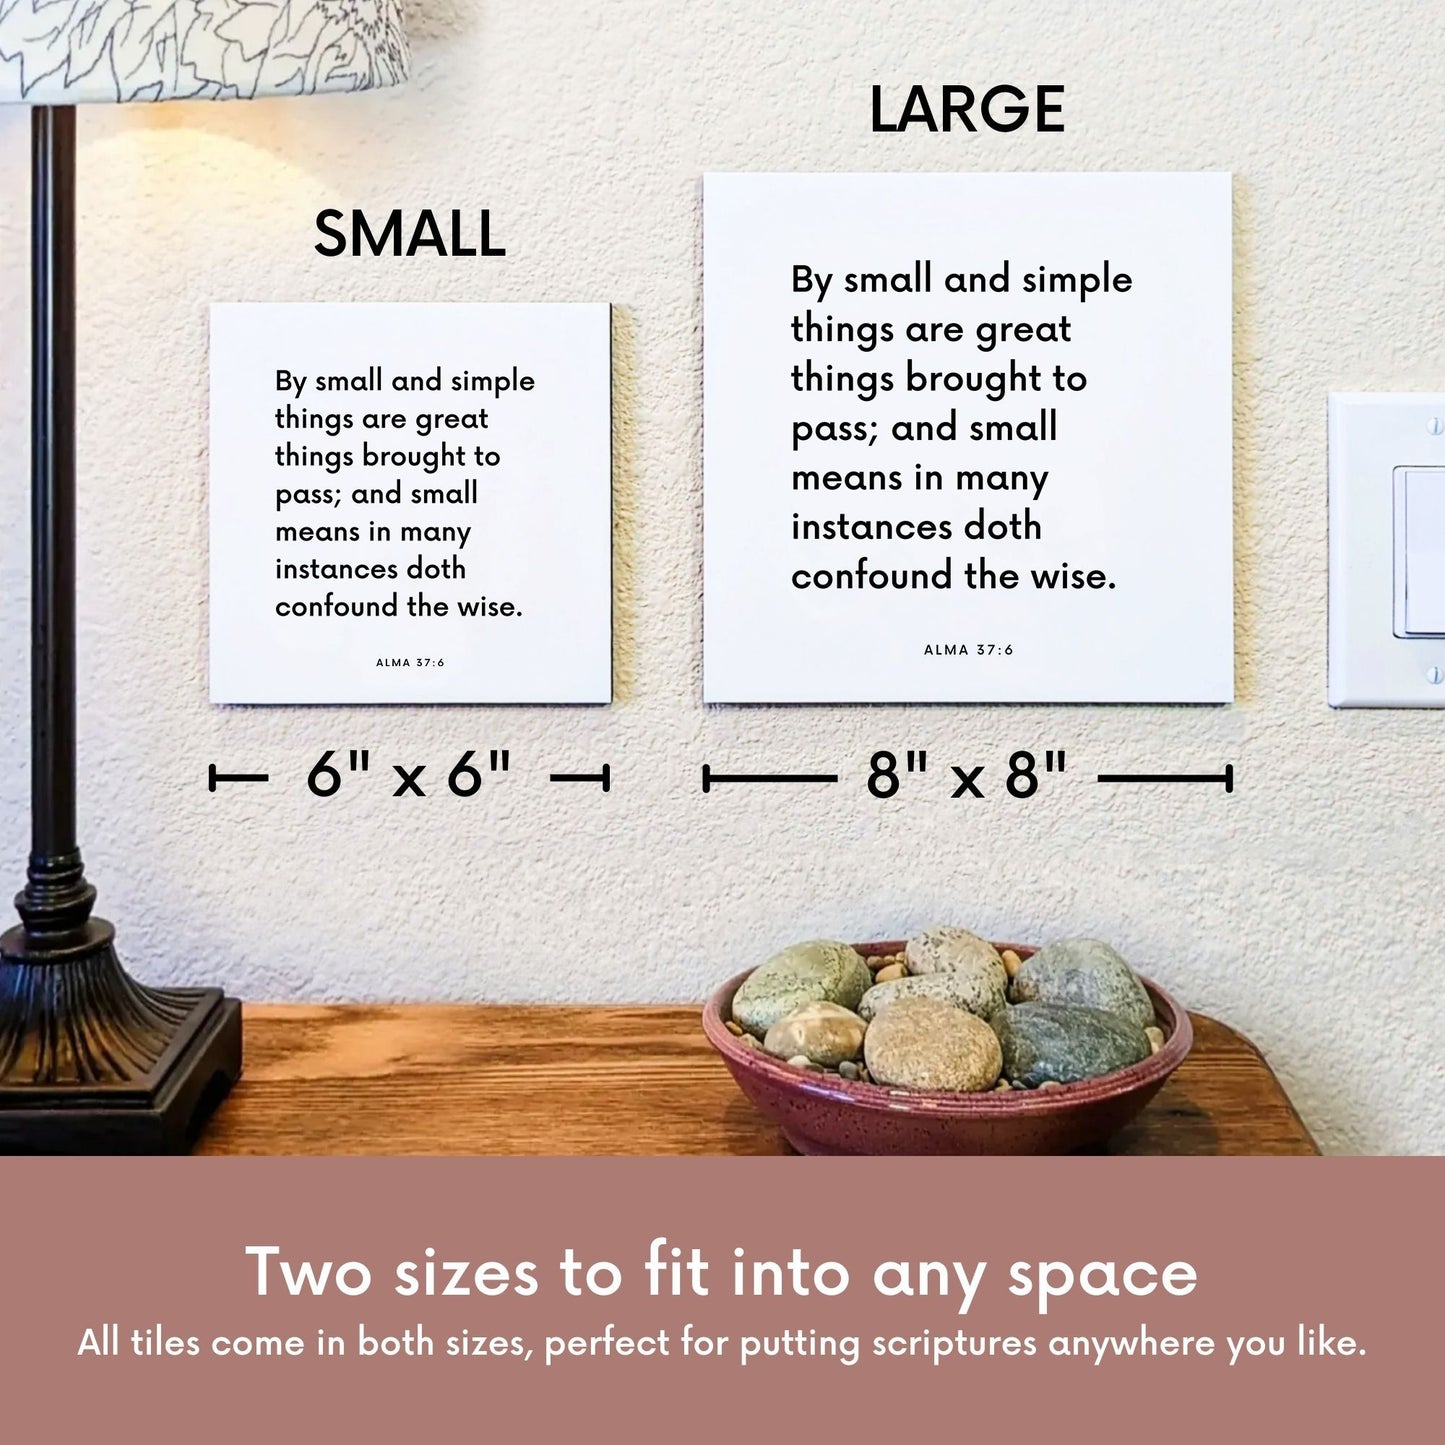 Scripture tile size comparison for Alma 37:6 - "By small and simple things are great things brought to pass"